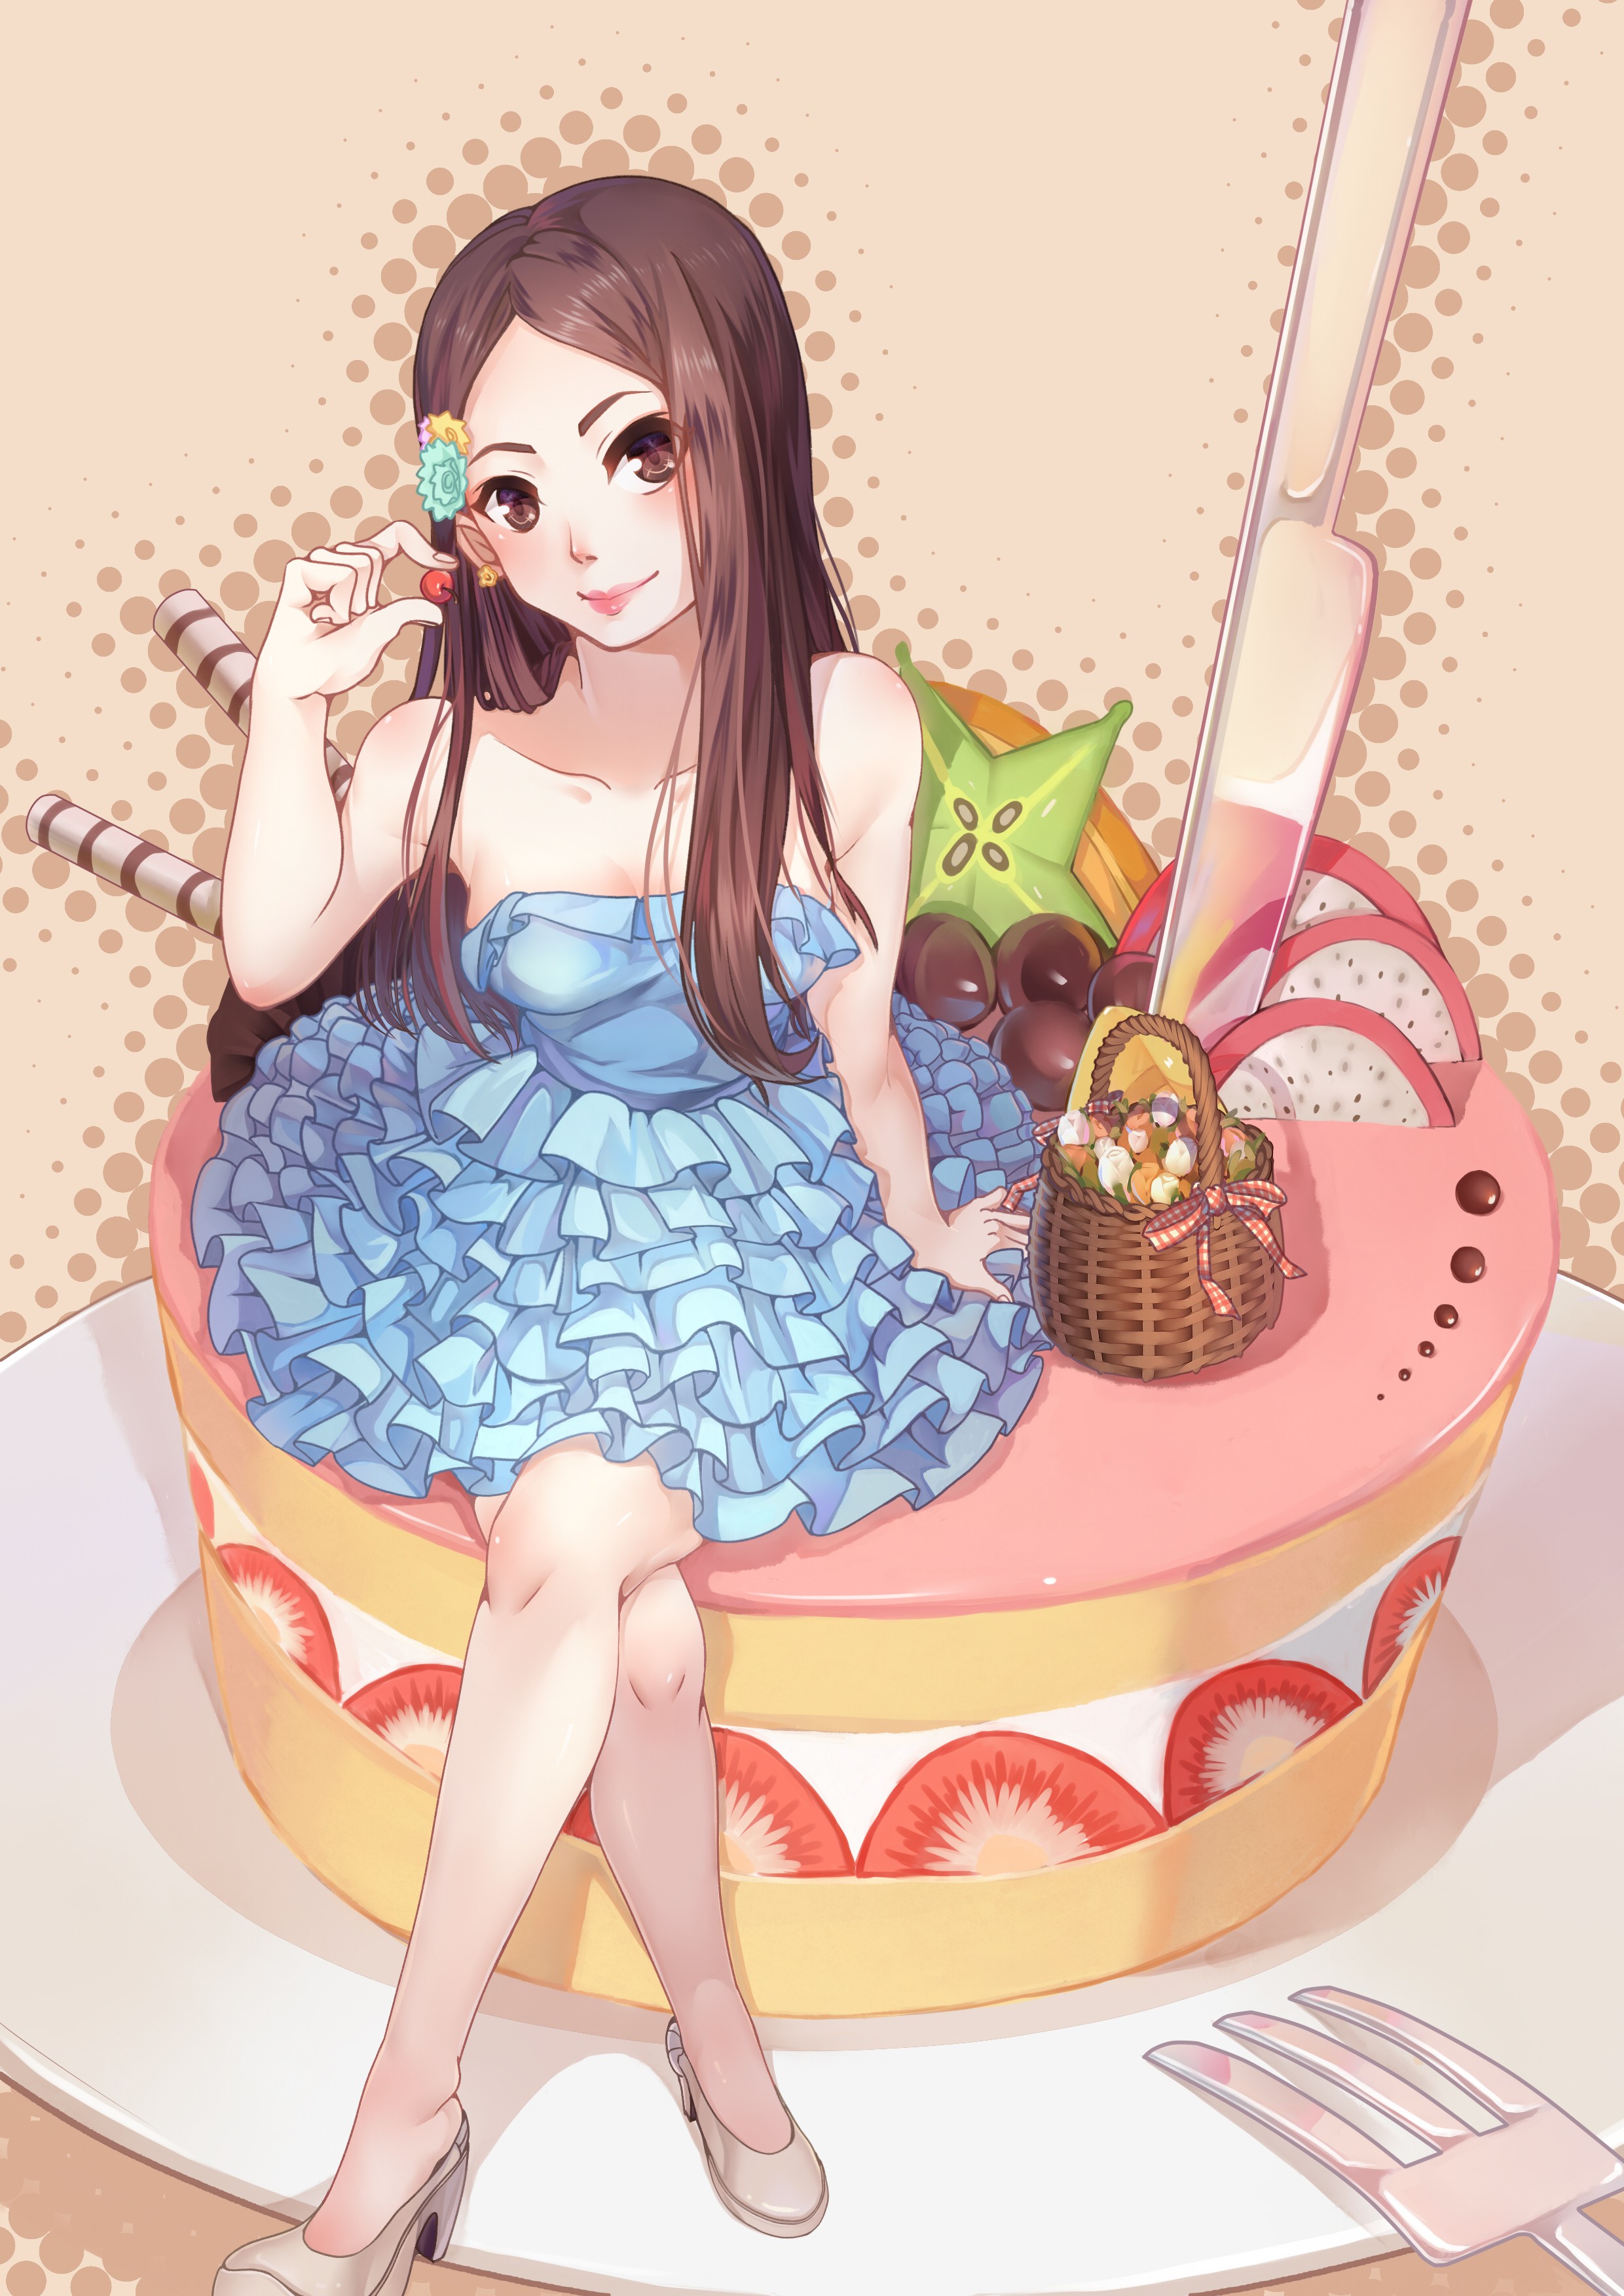 Anime 2480x3507 anime anime girls dress heels long hair candy original characters sweets cake Pixiv legs crossed baskets blue dress looking at viewer